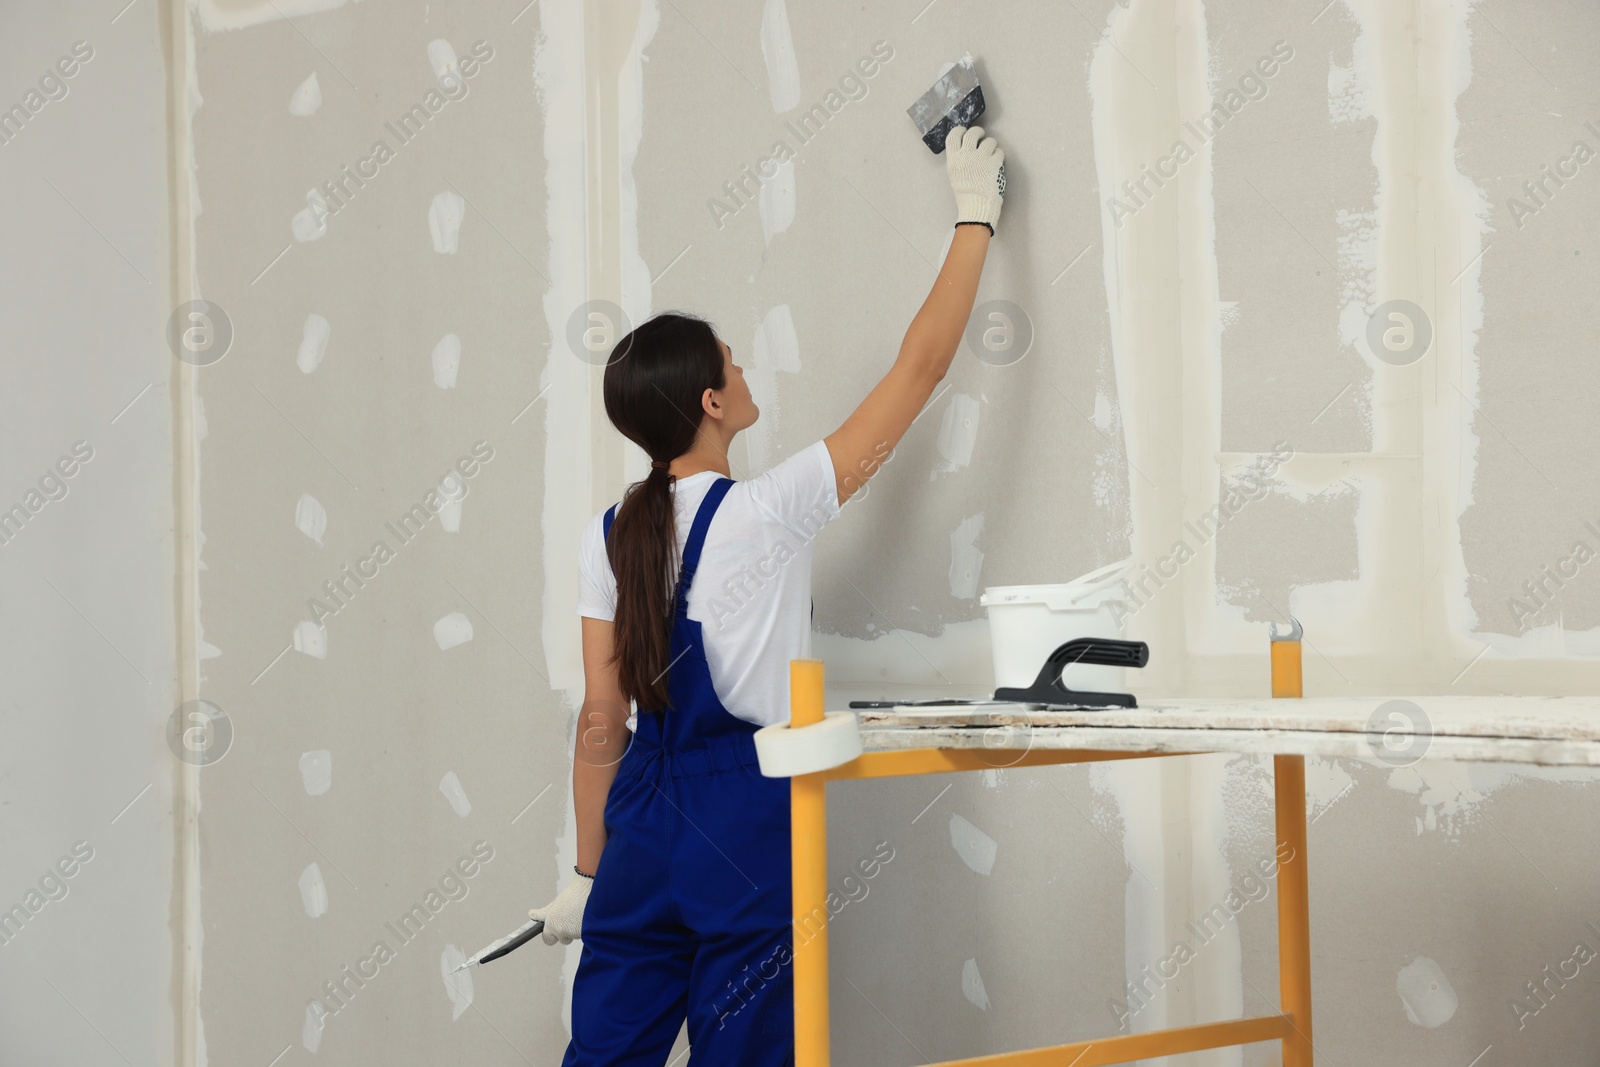 Photo of Worker plastering wall with putty knife indoors